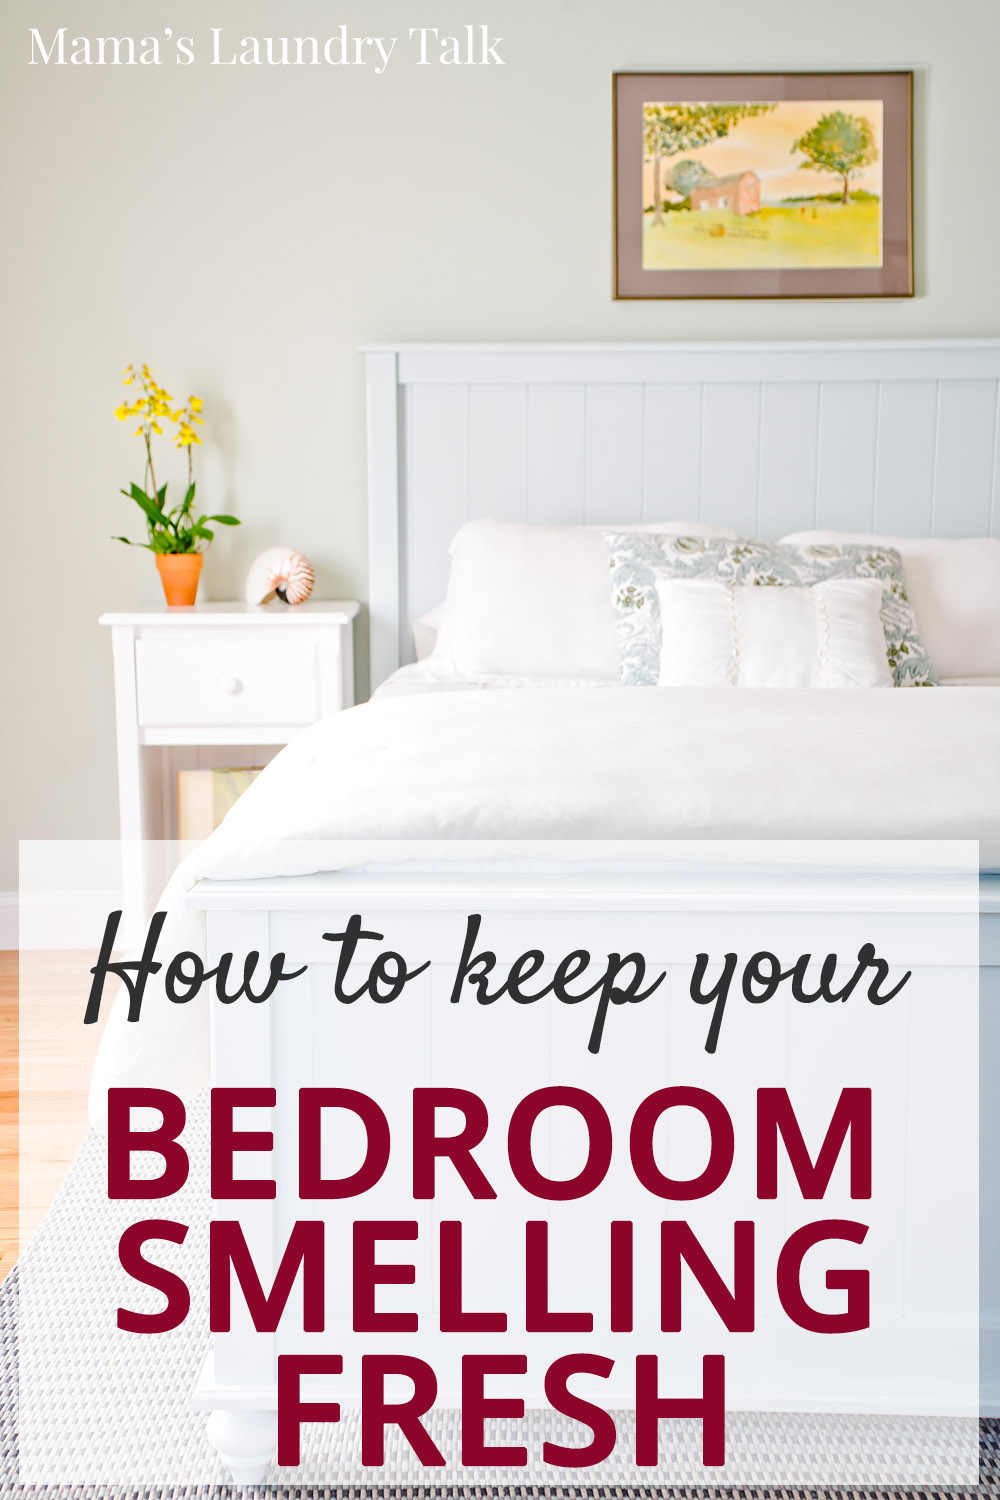 How to Keep Your Bedroom Smelling Fresh